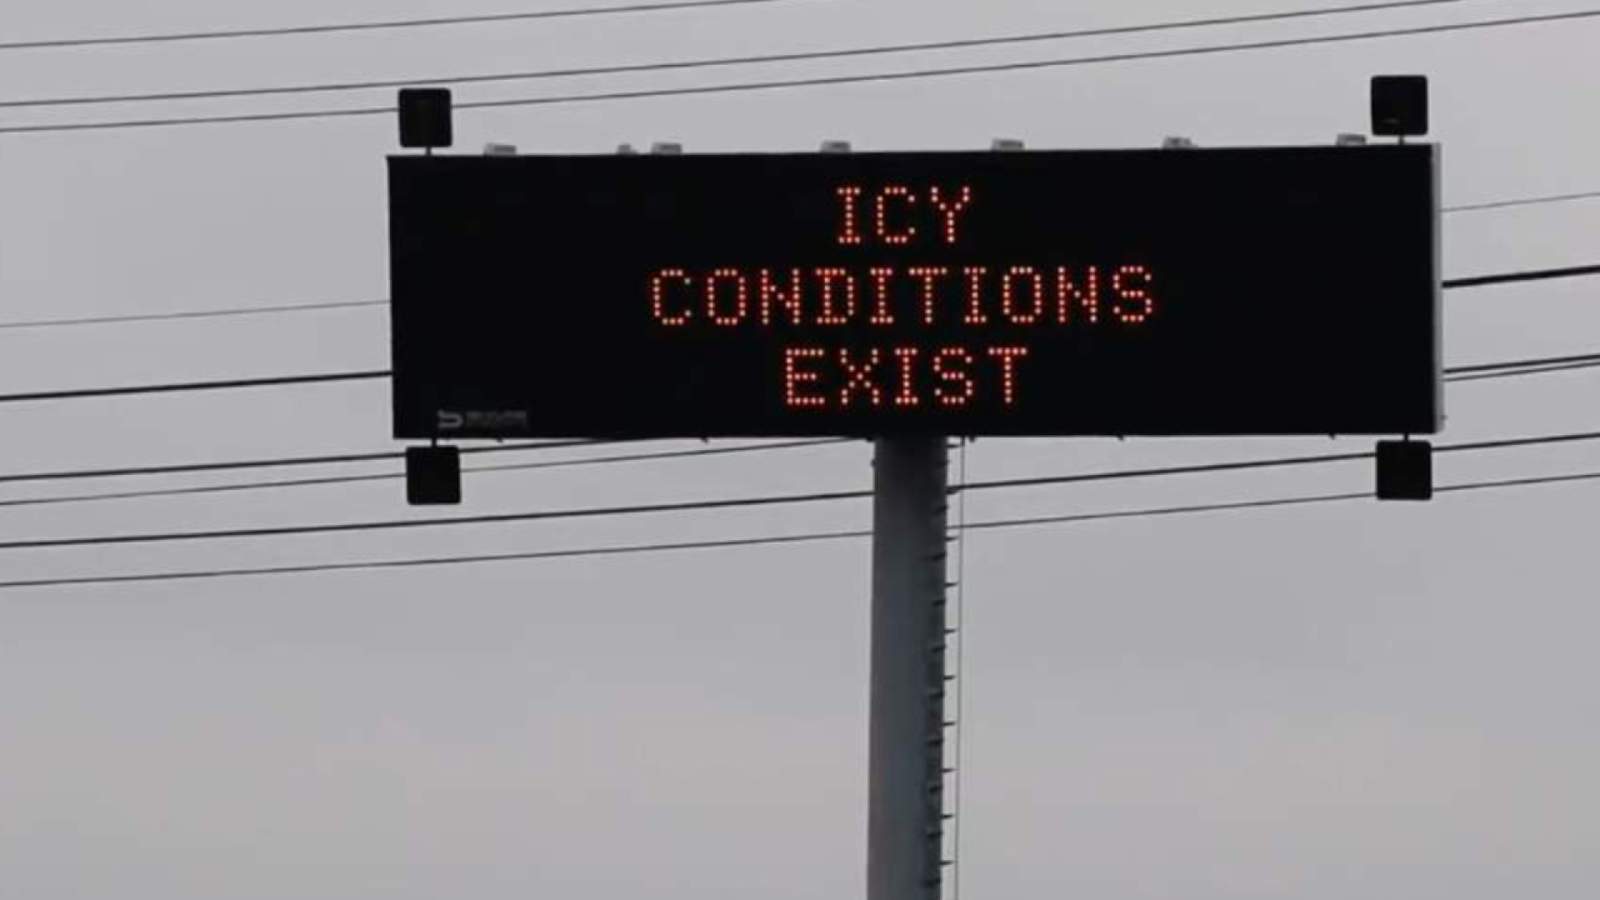 TxDOT warns that dangerous, icy conditions remain on roads with more wintry weather in San Antonio region